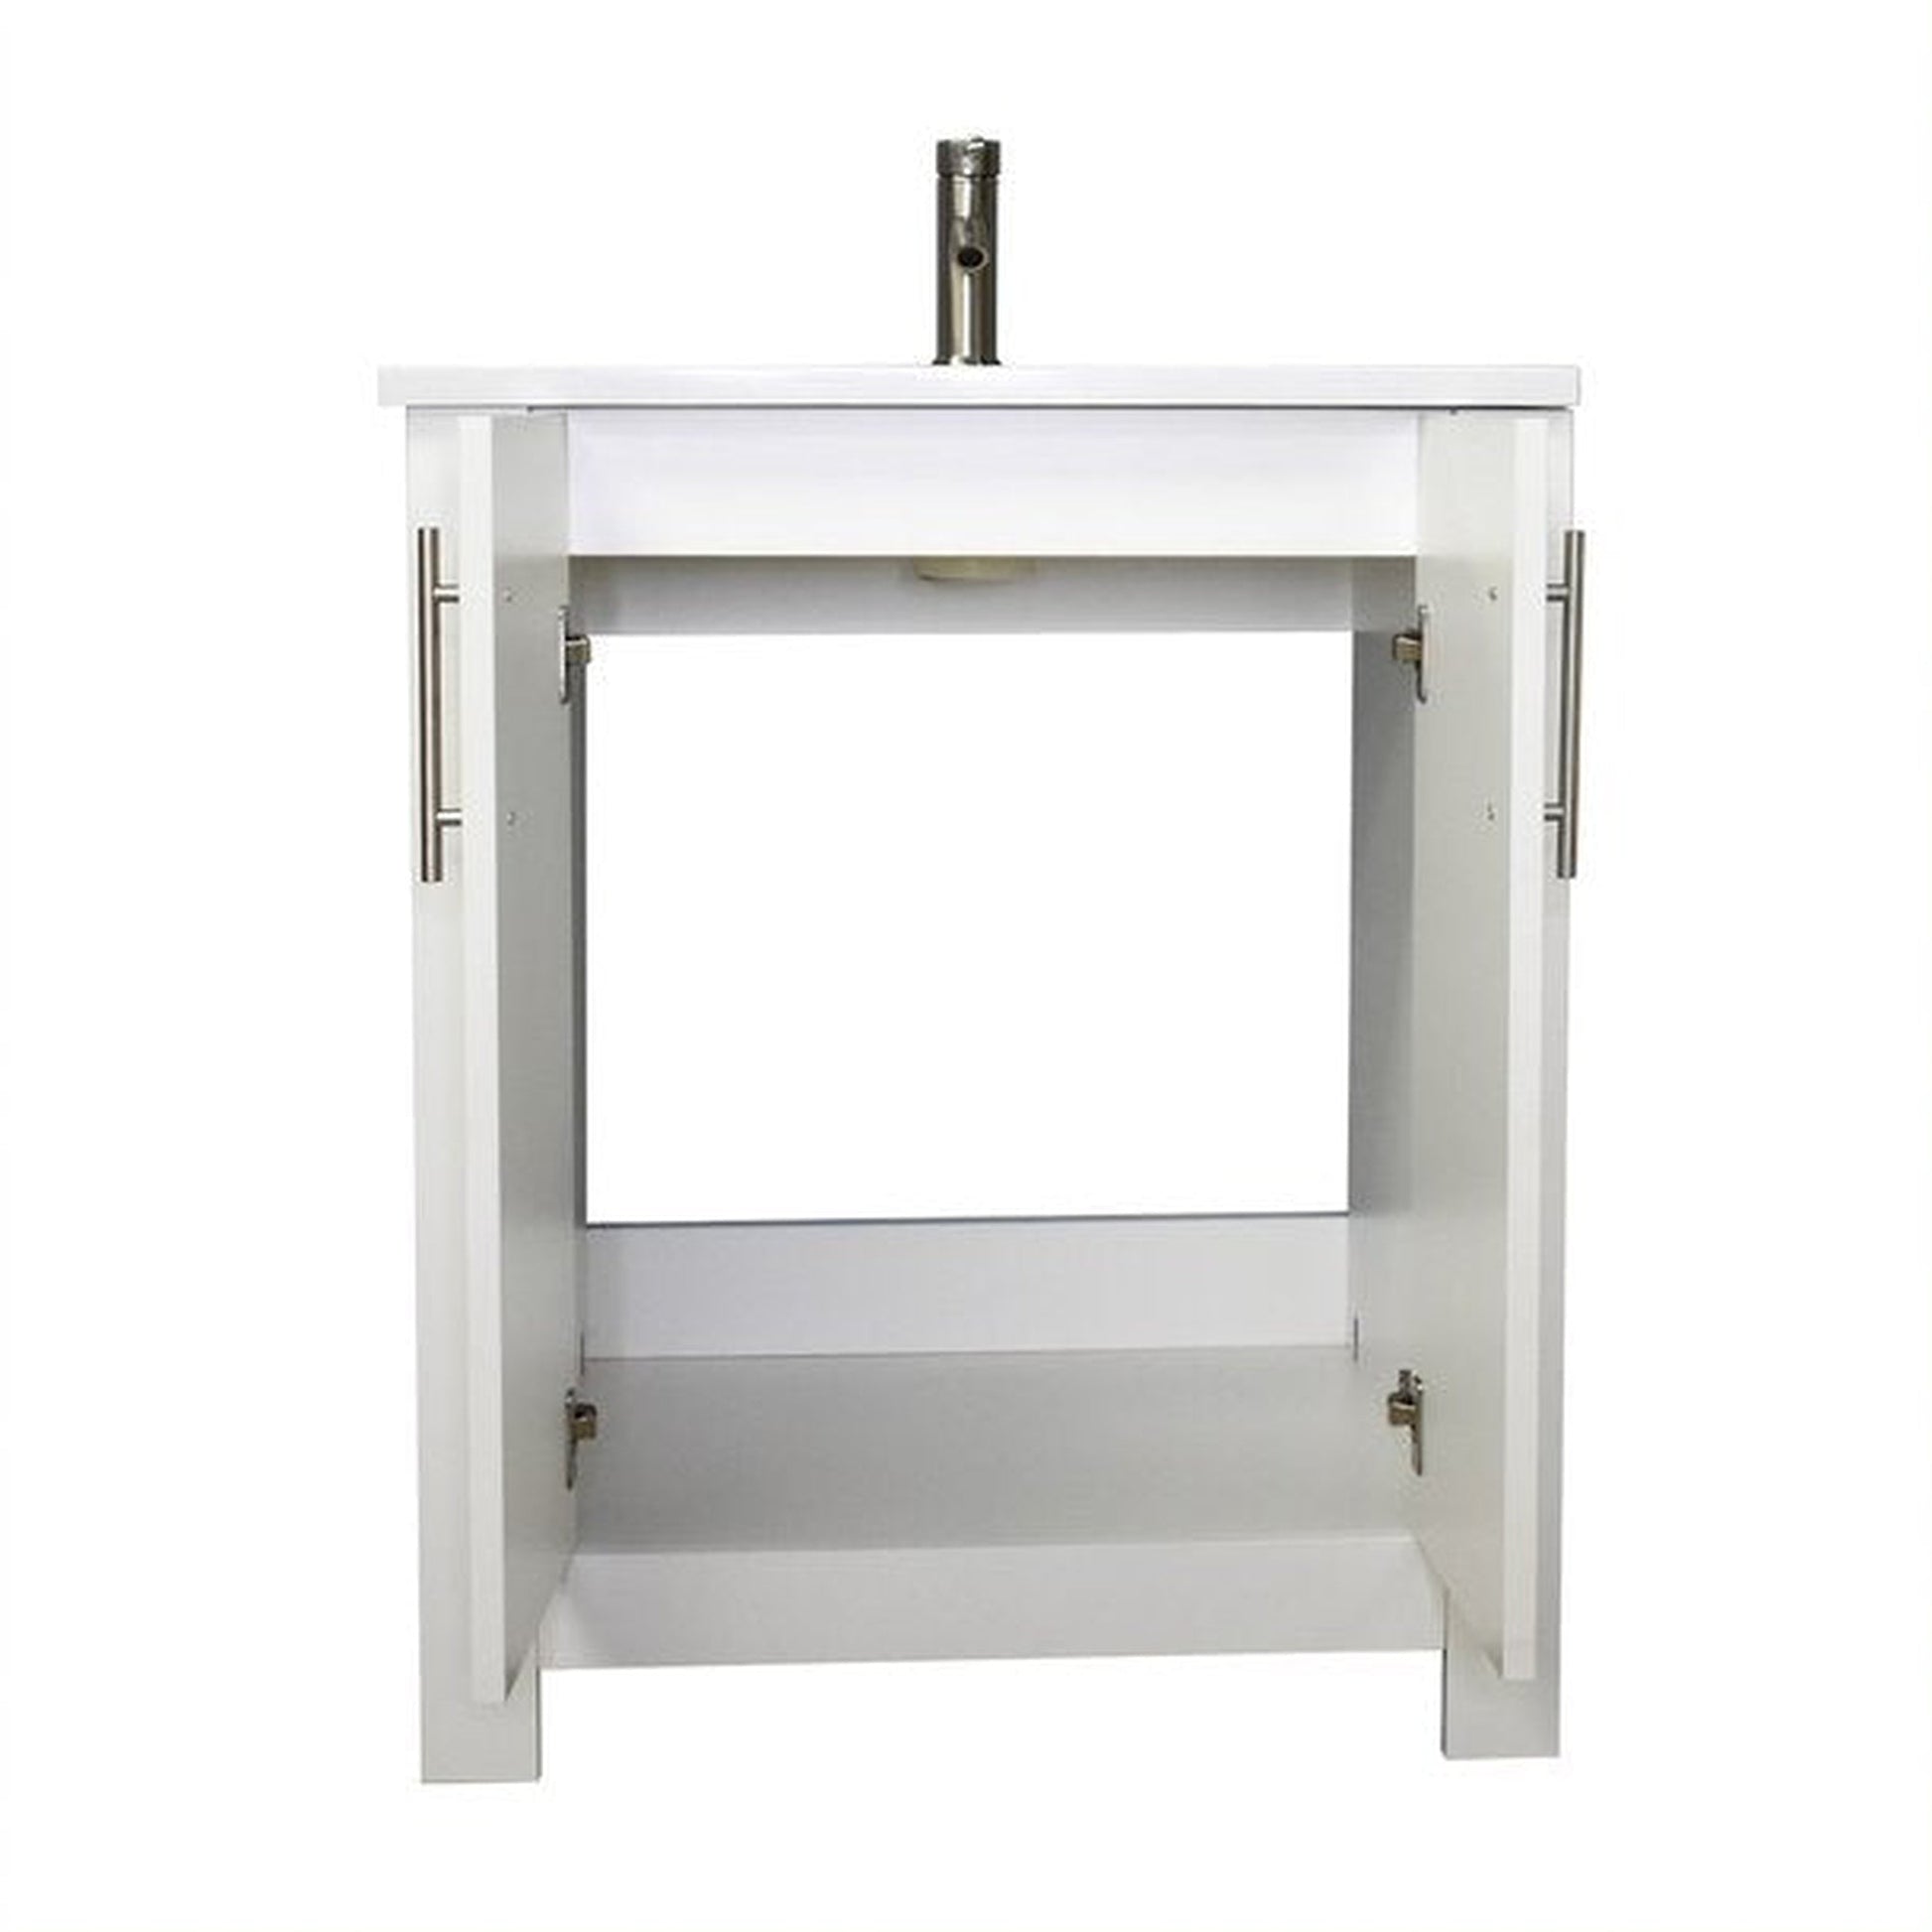 Volpa USA Austin 30" x 20" White Modern Freestanding Bathroom Vanity With Acrylic Top, Integrated Acrylic Sink And Brushed Nickel Handles